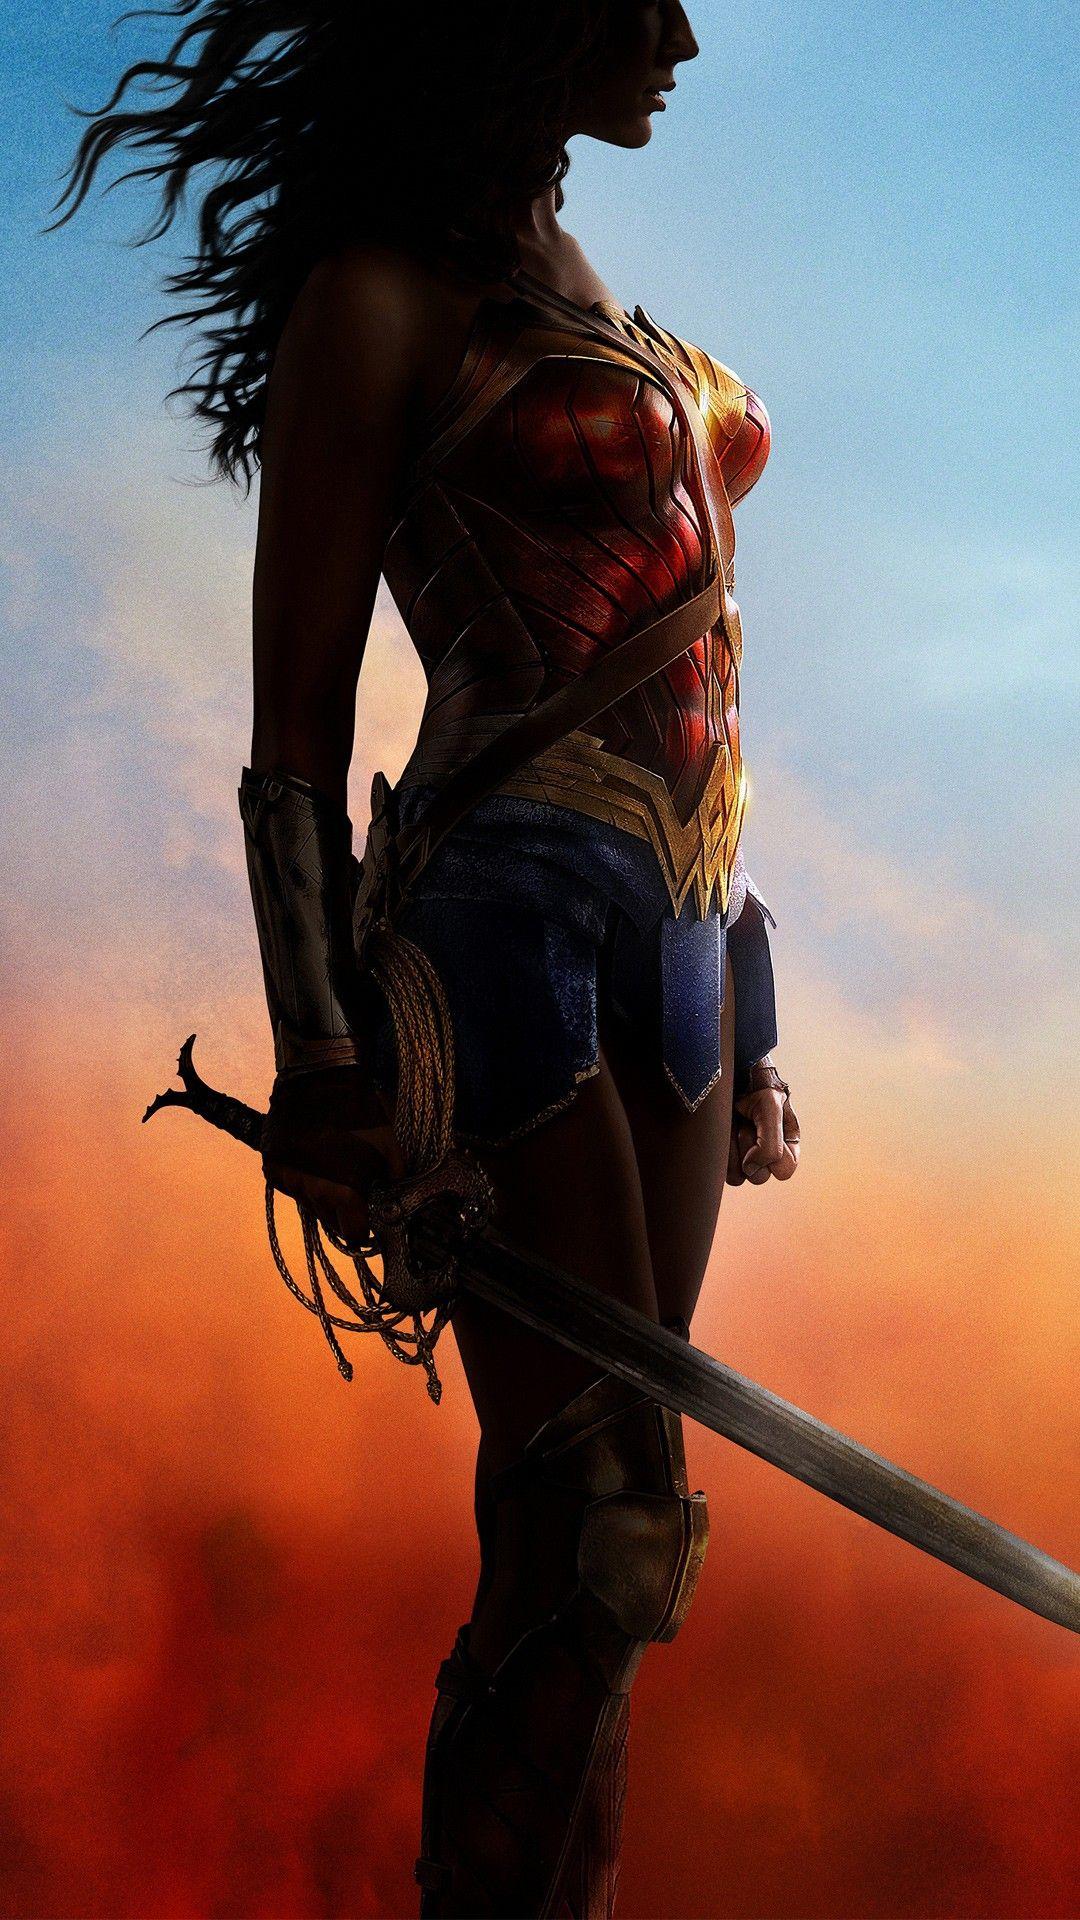 Wonder Woman for ios download free